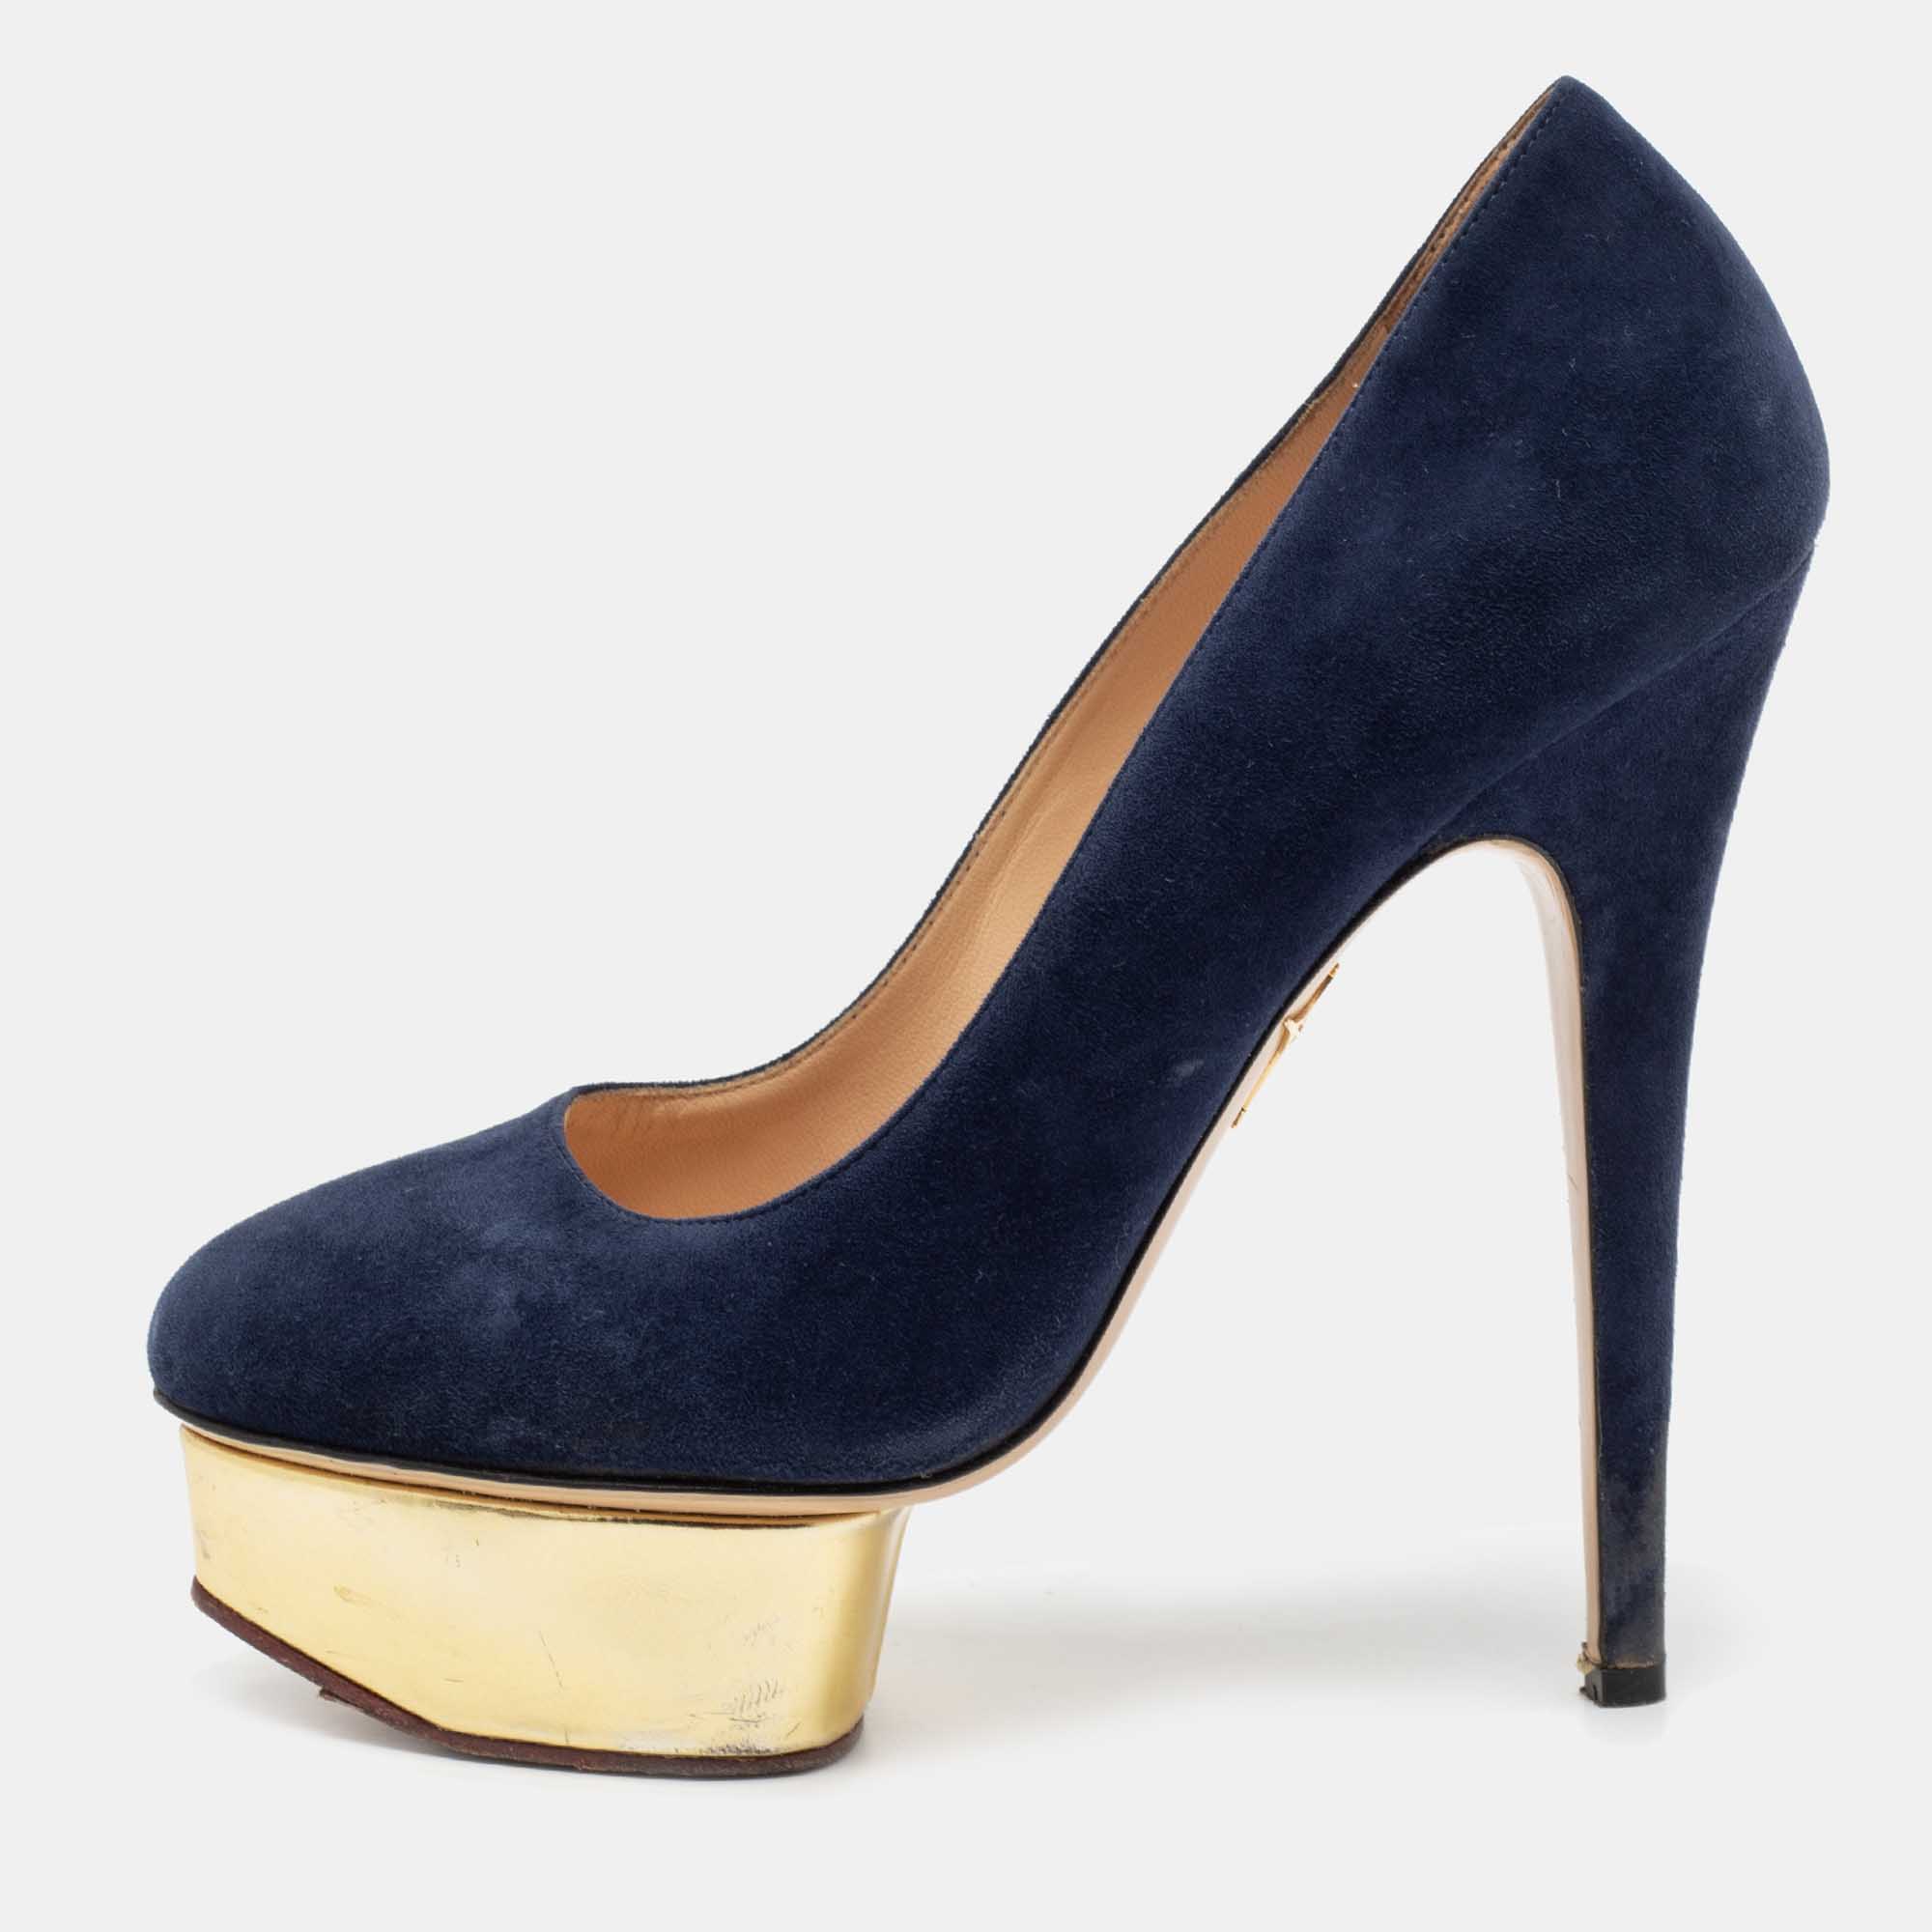 Charlotte olympia navy blue suede dolly platform pumps size 38